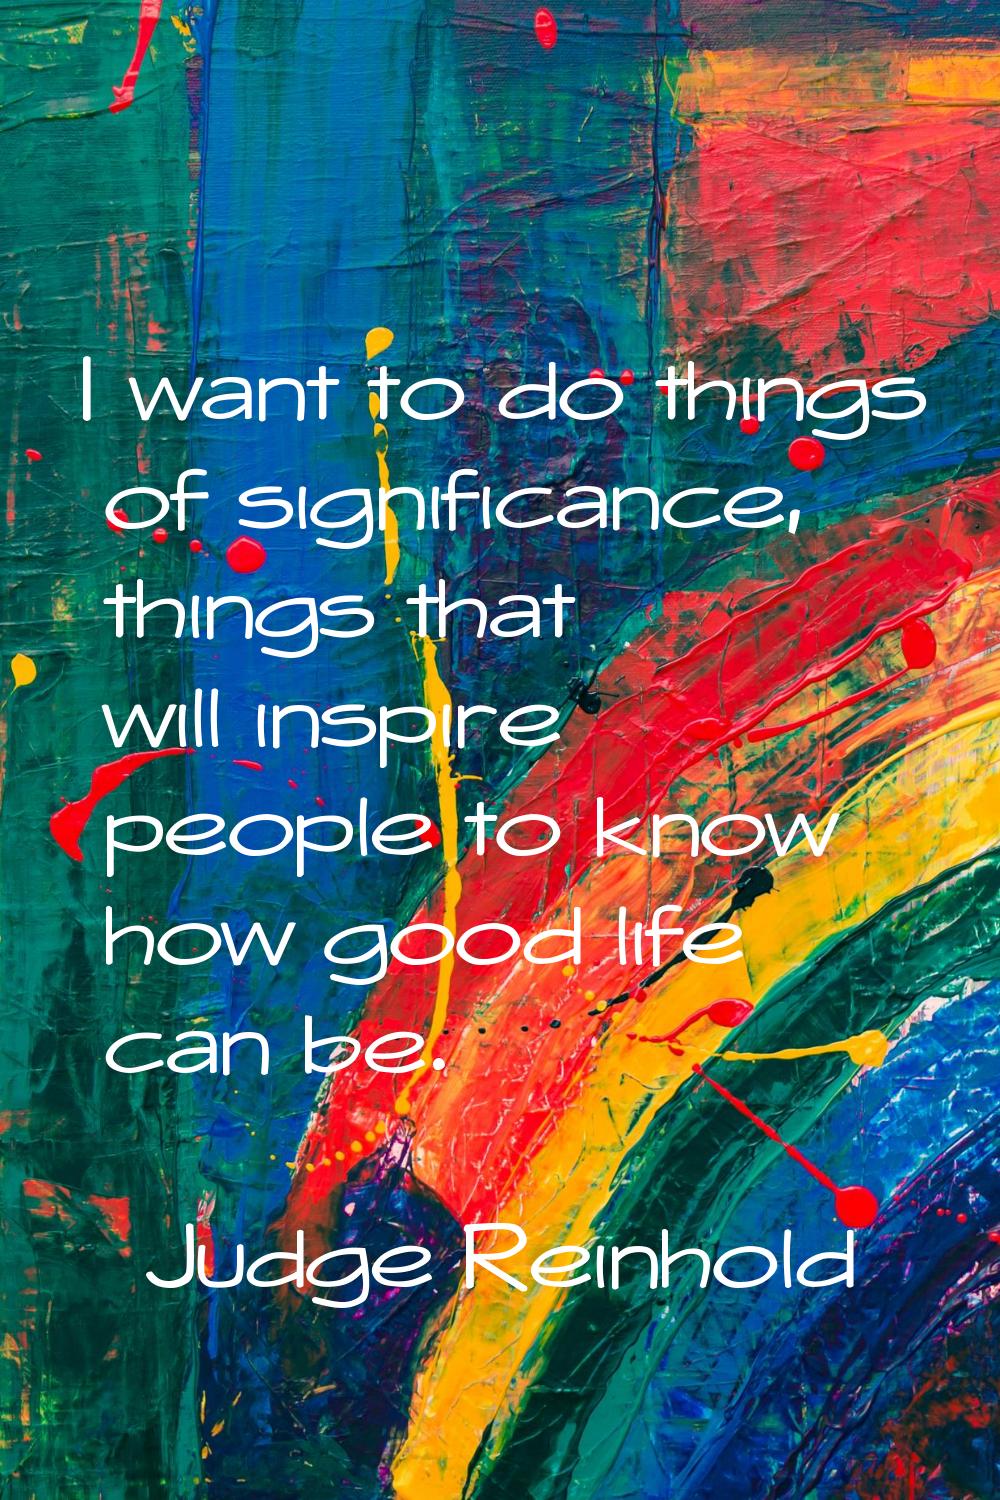 I want to do things of significance, things that will inspire people to know how good life can be.